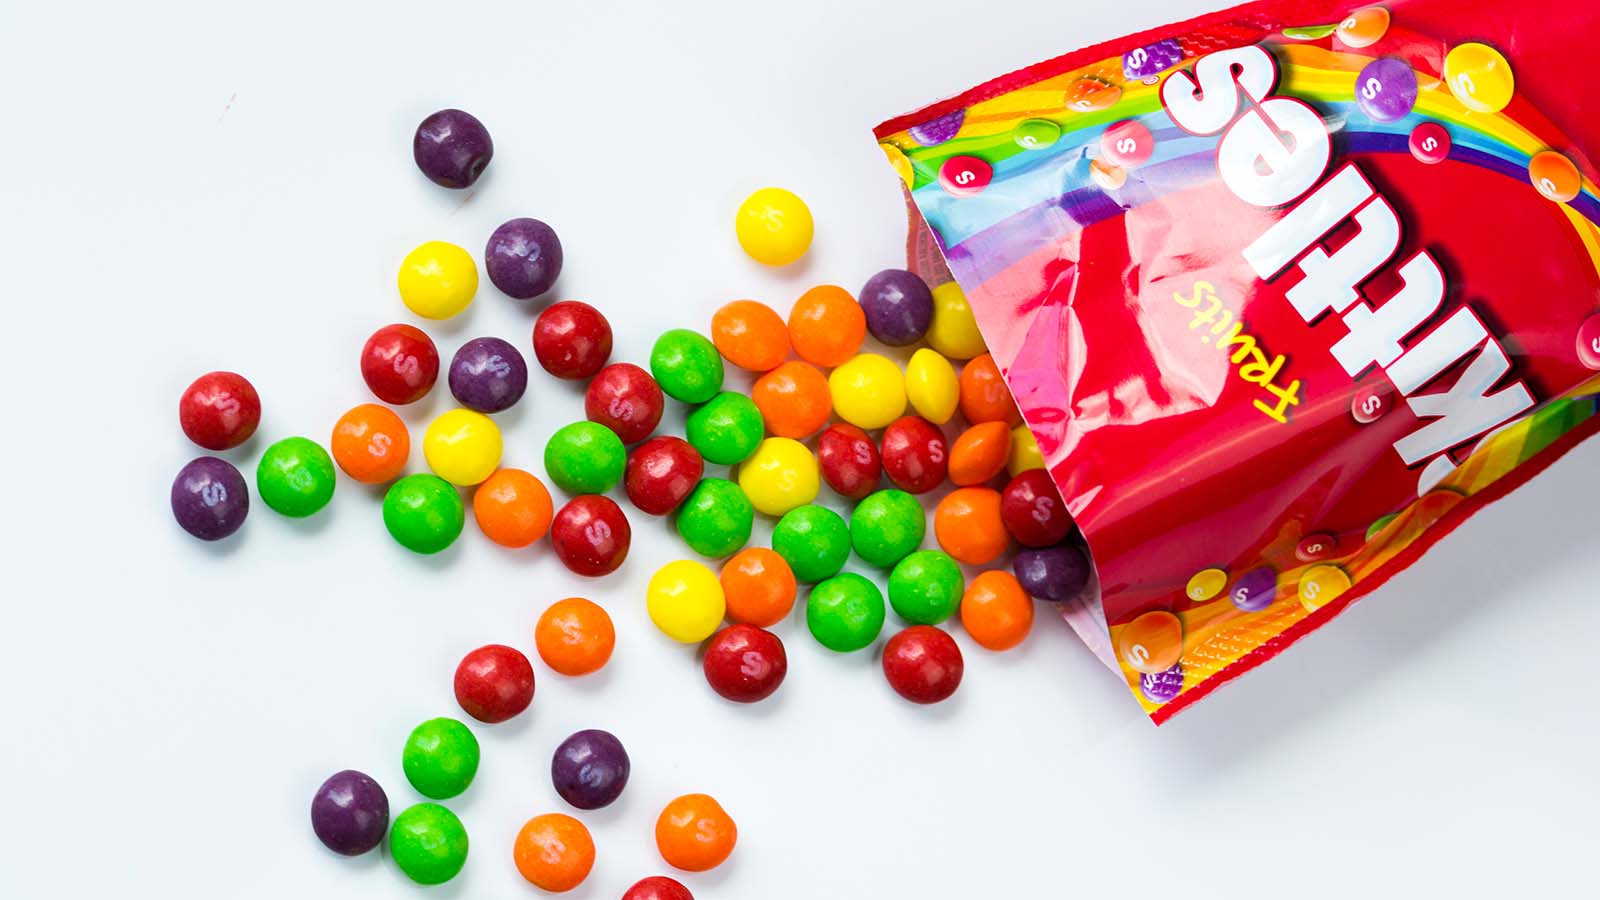 A red bag of skittles is spilled out across a white flat surface representing the candy lawsuit.